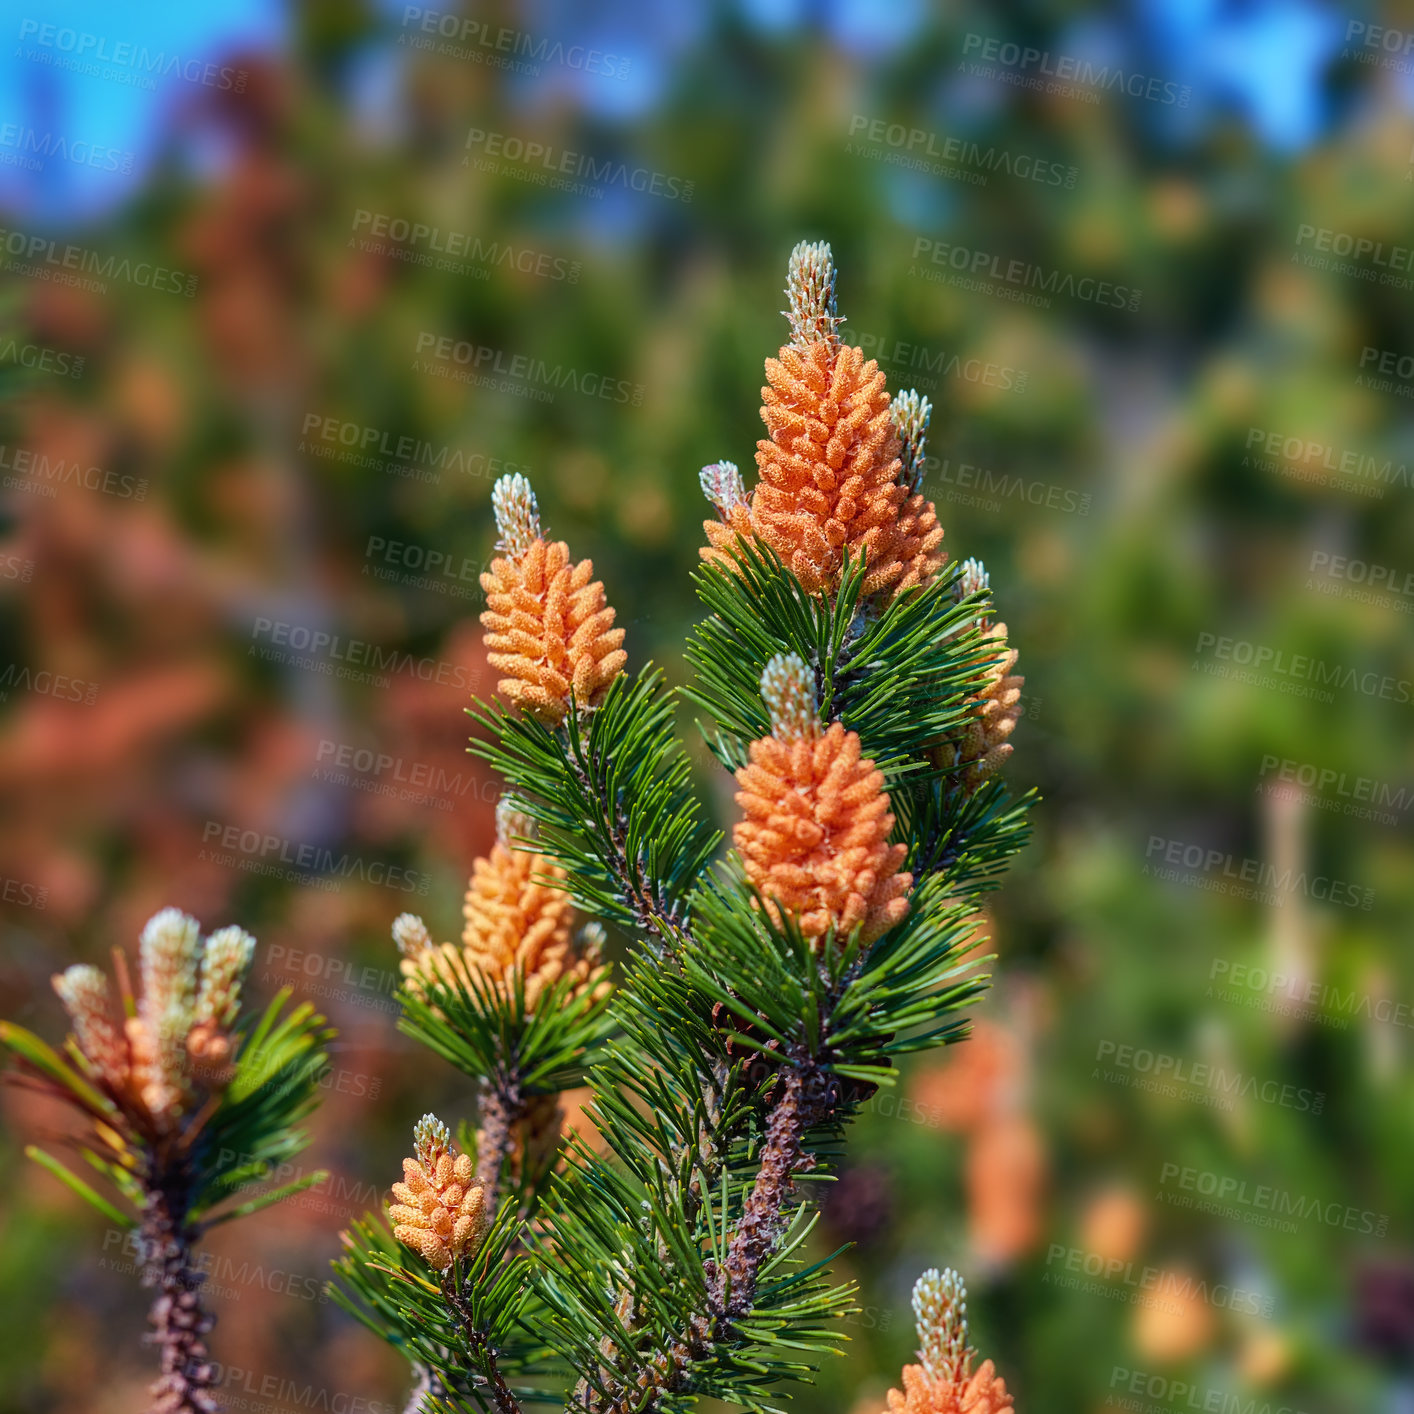 Buy stock photo Scotch pine Pinus sylvestris male pollen flowers on a tree growing in a evergreen coniferous forest in Denmark. Flowers growing on a pine tree branch. Closeup of needles and buds on a twig in nature